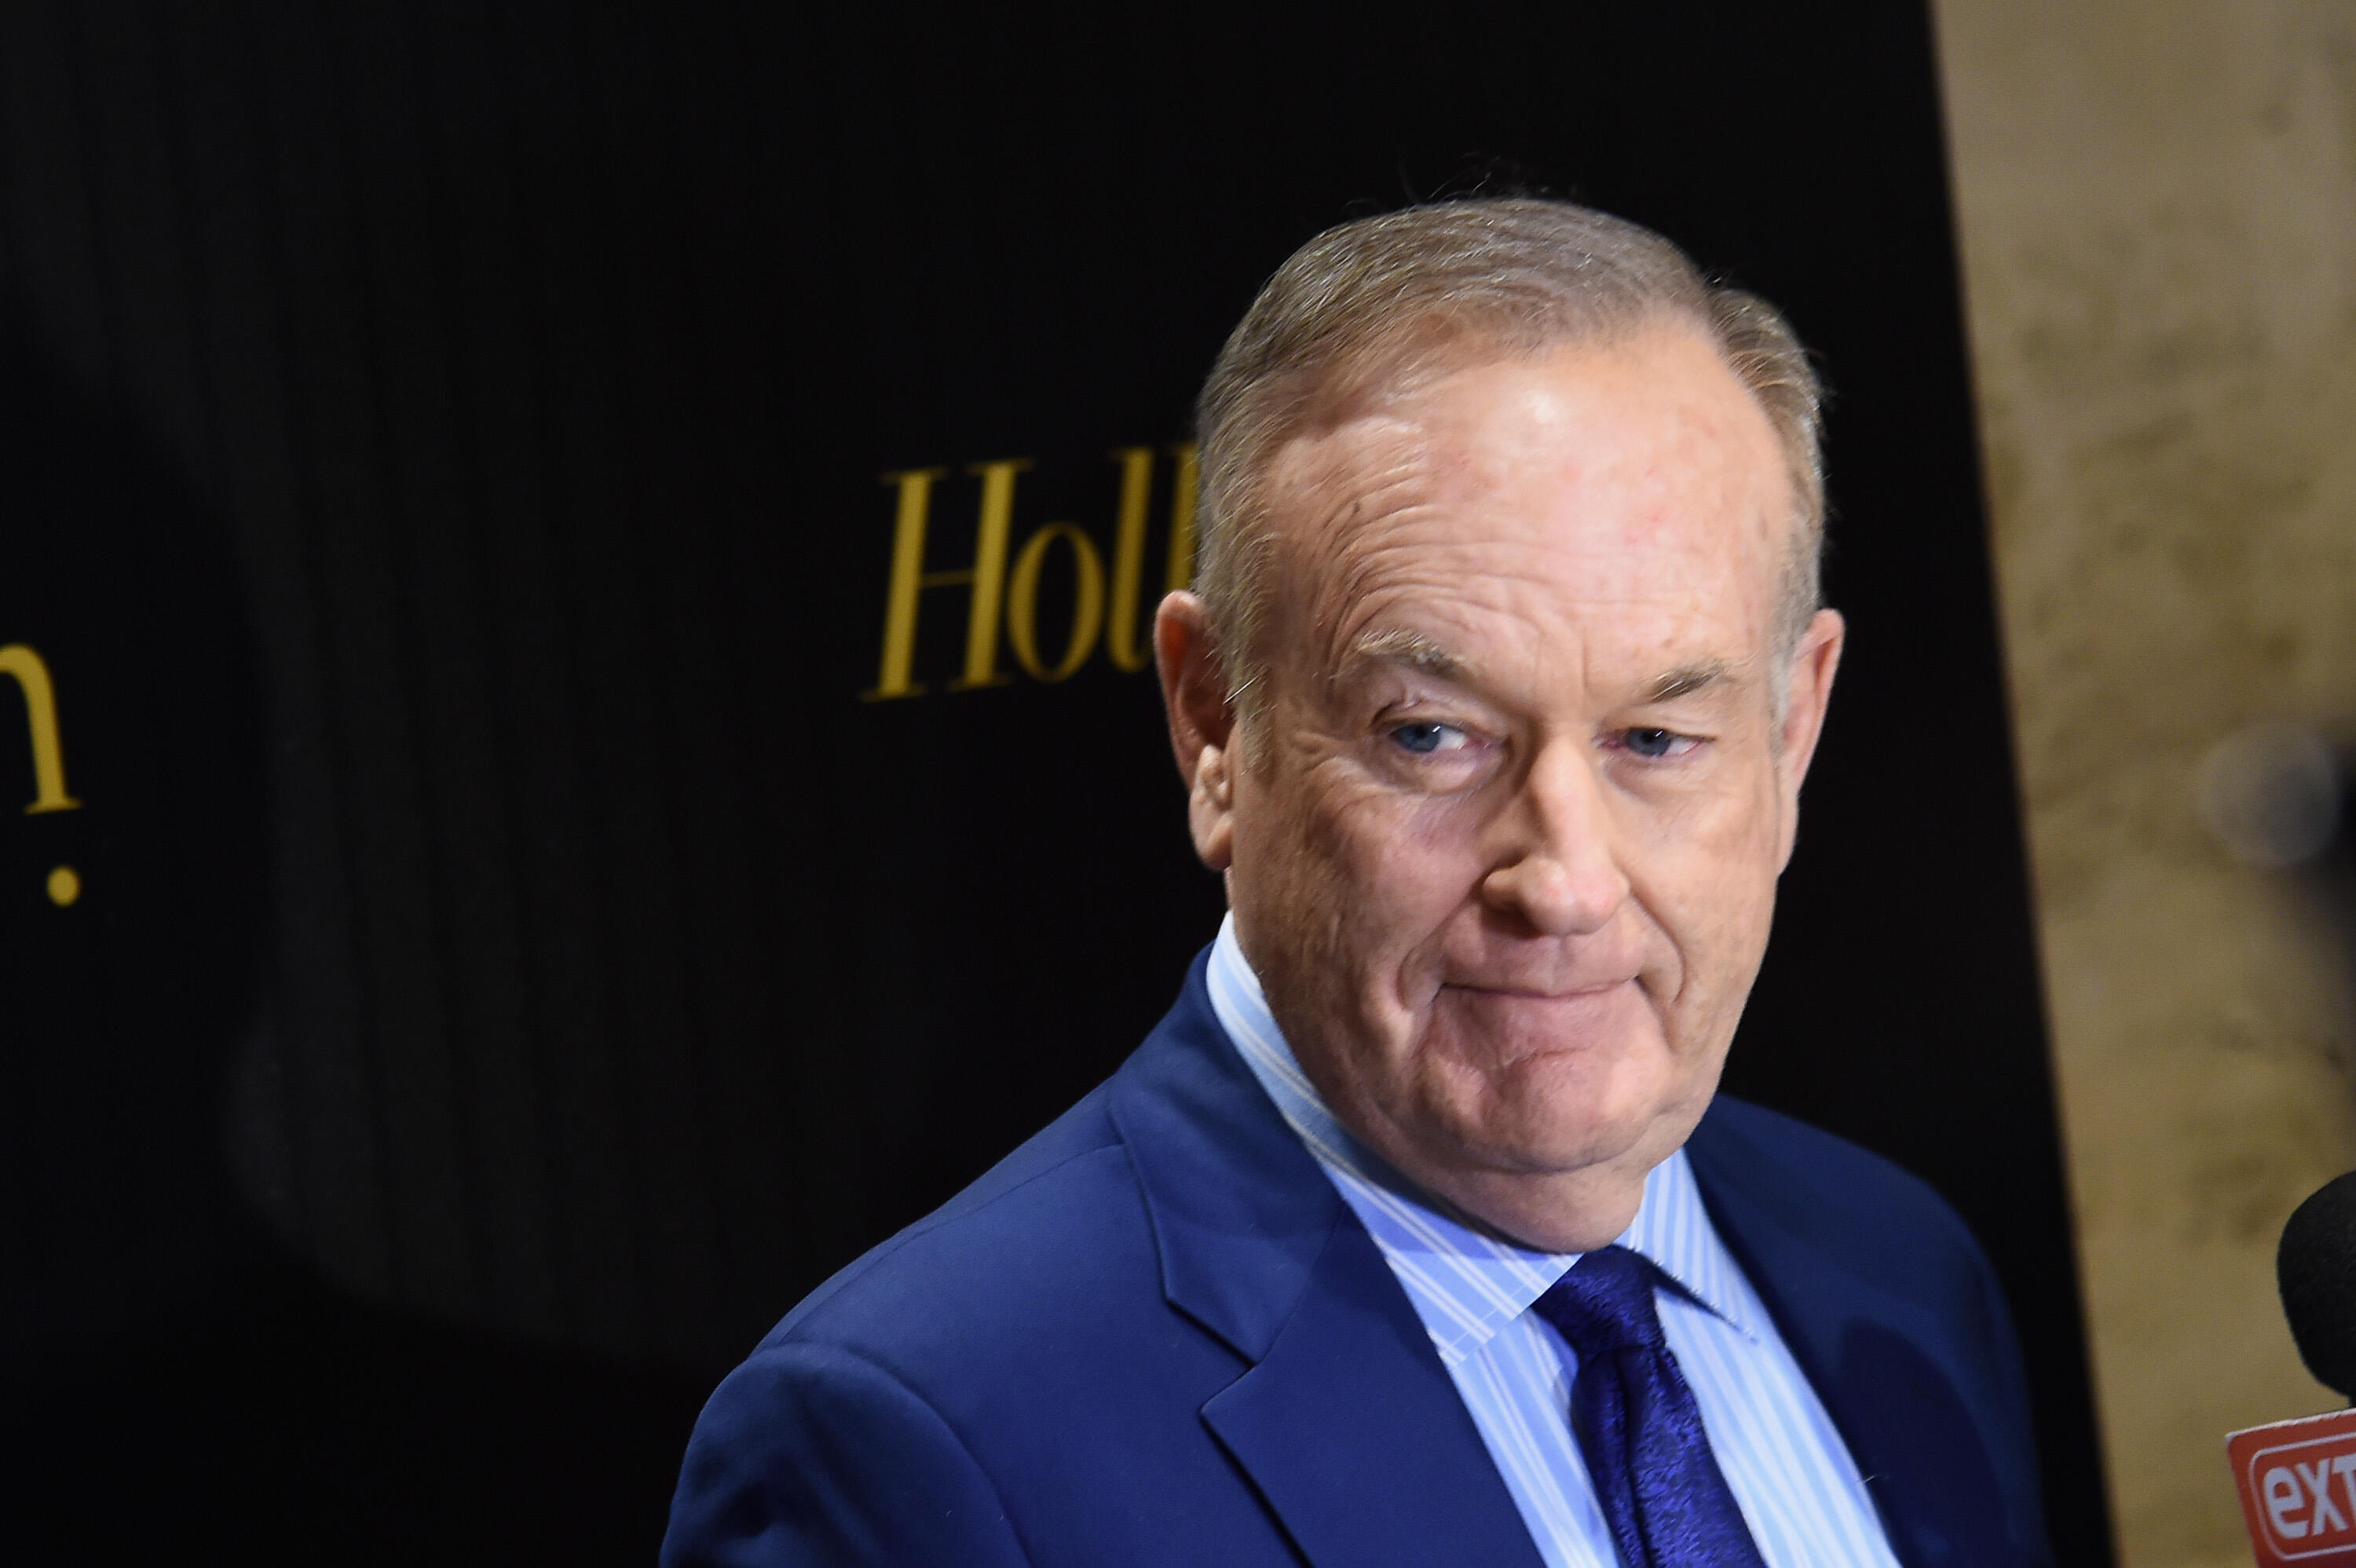 NEW YORK, NEW YORK - APRIL 06:  Television host Bill O'Reilly attends the Hollywood Reporter's 2016 35 Most Powerful People in Media at Four Seasons Restaurant on April 6, 2016 in New York City.  (Photo by Ilya S. Savenok/Getty Images)